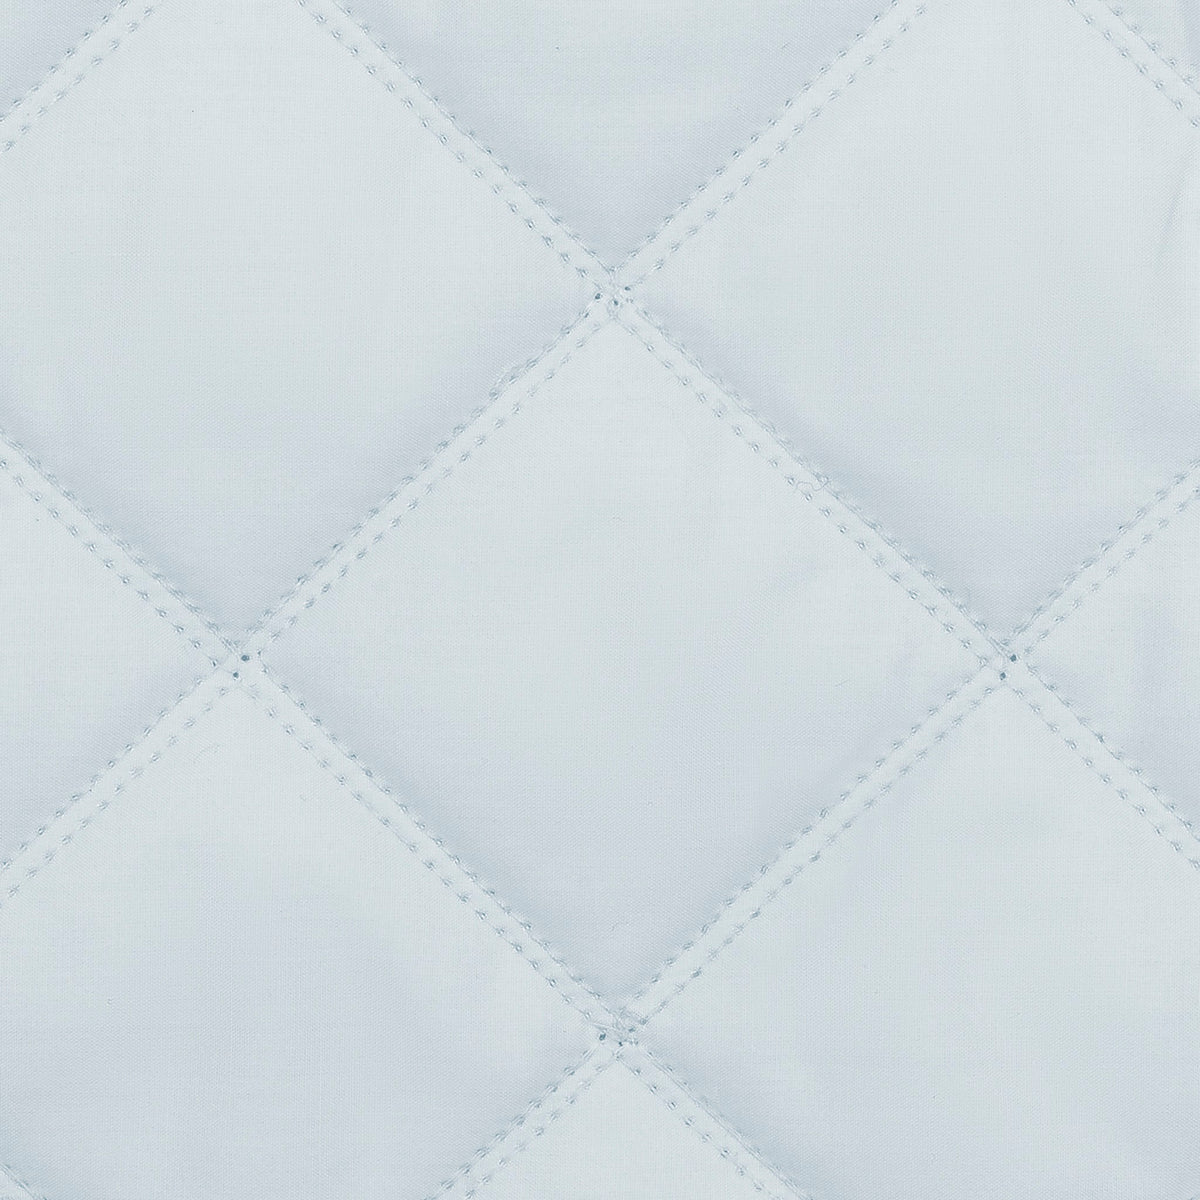 Swatch Sample of Matouk Milano Quilt Bedding in Color Pool